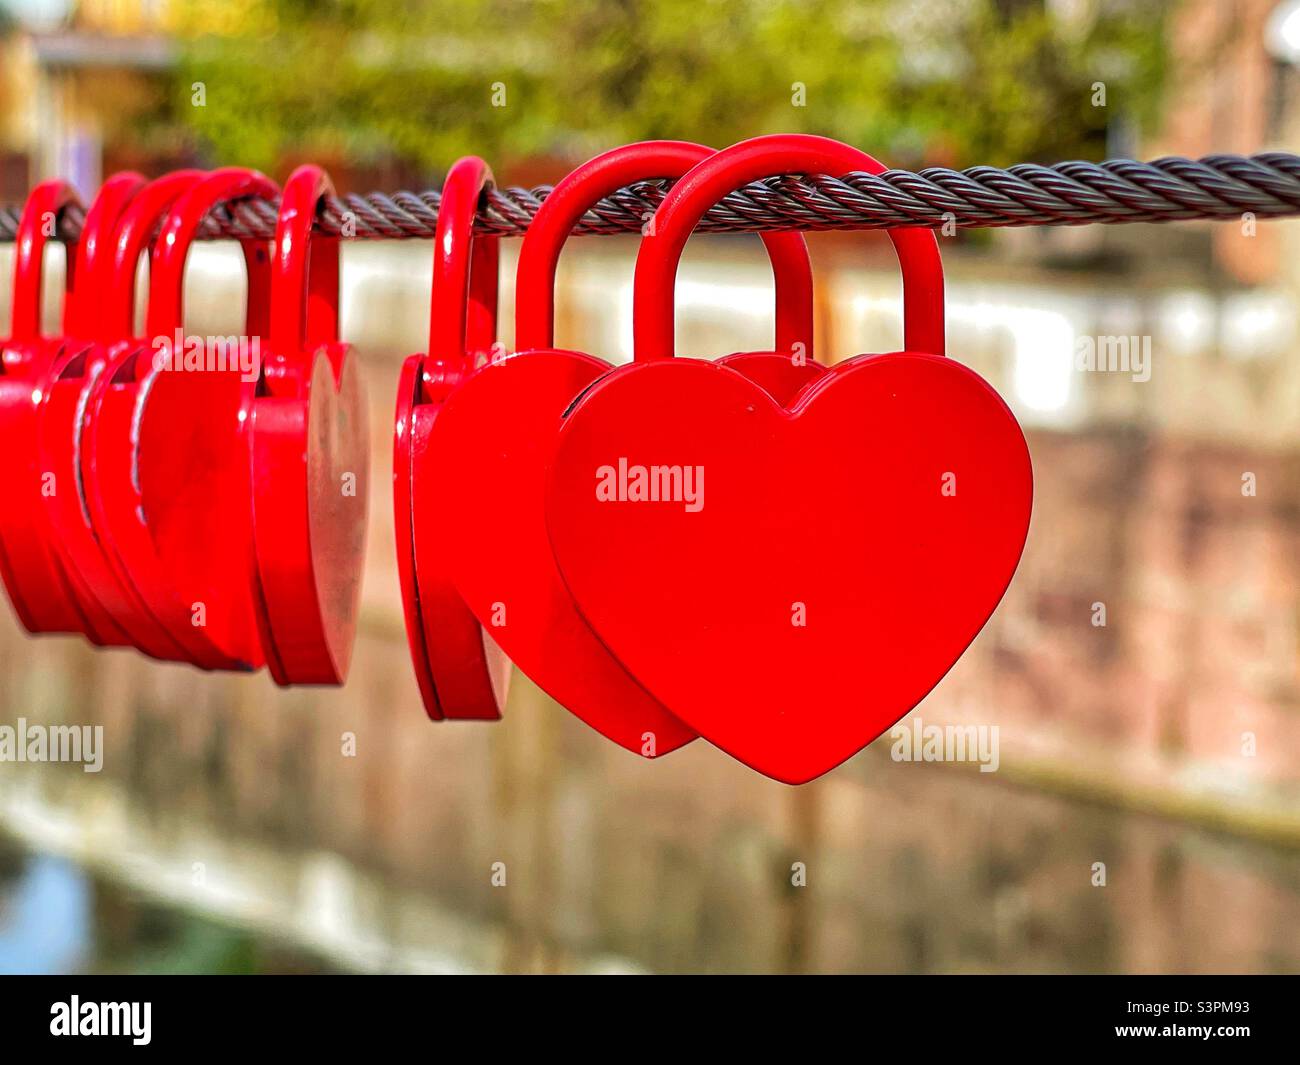 Red heart shaped locks on a steel wire cable. No people. Stock Photo